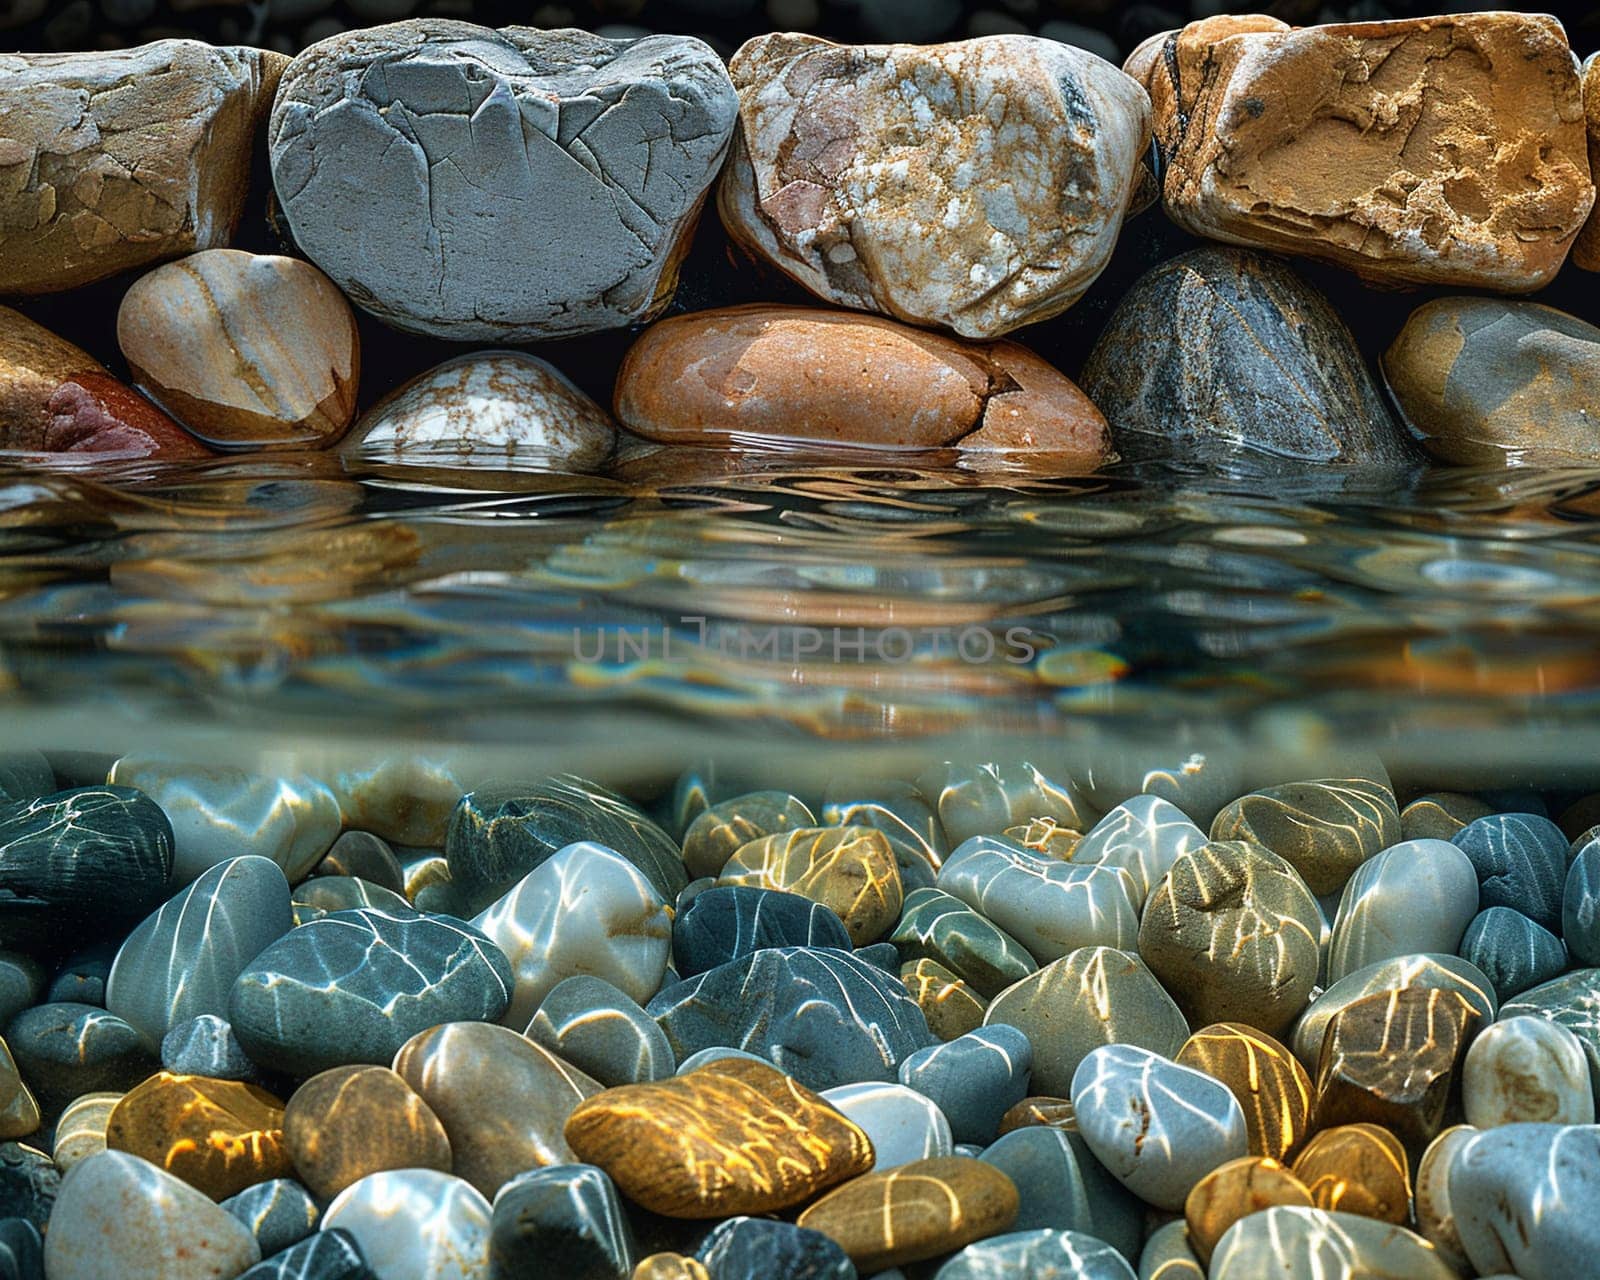 Smooth pebbles under clear stream water, for peaceful and zen-like designs.